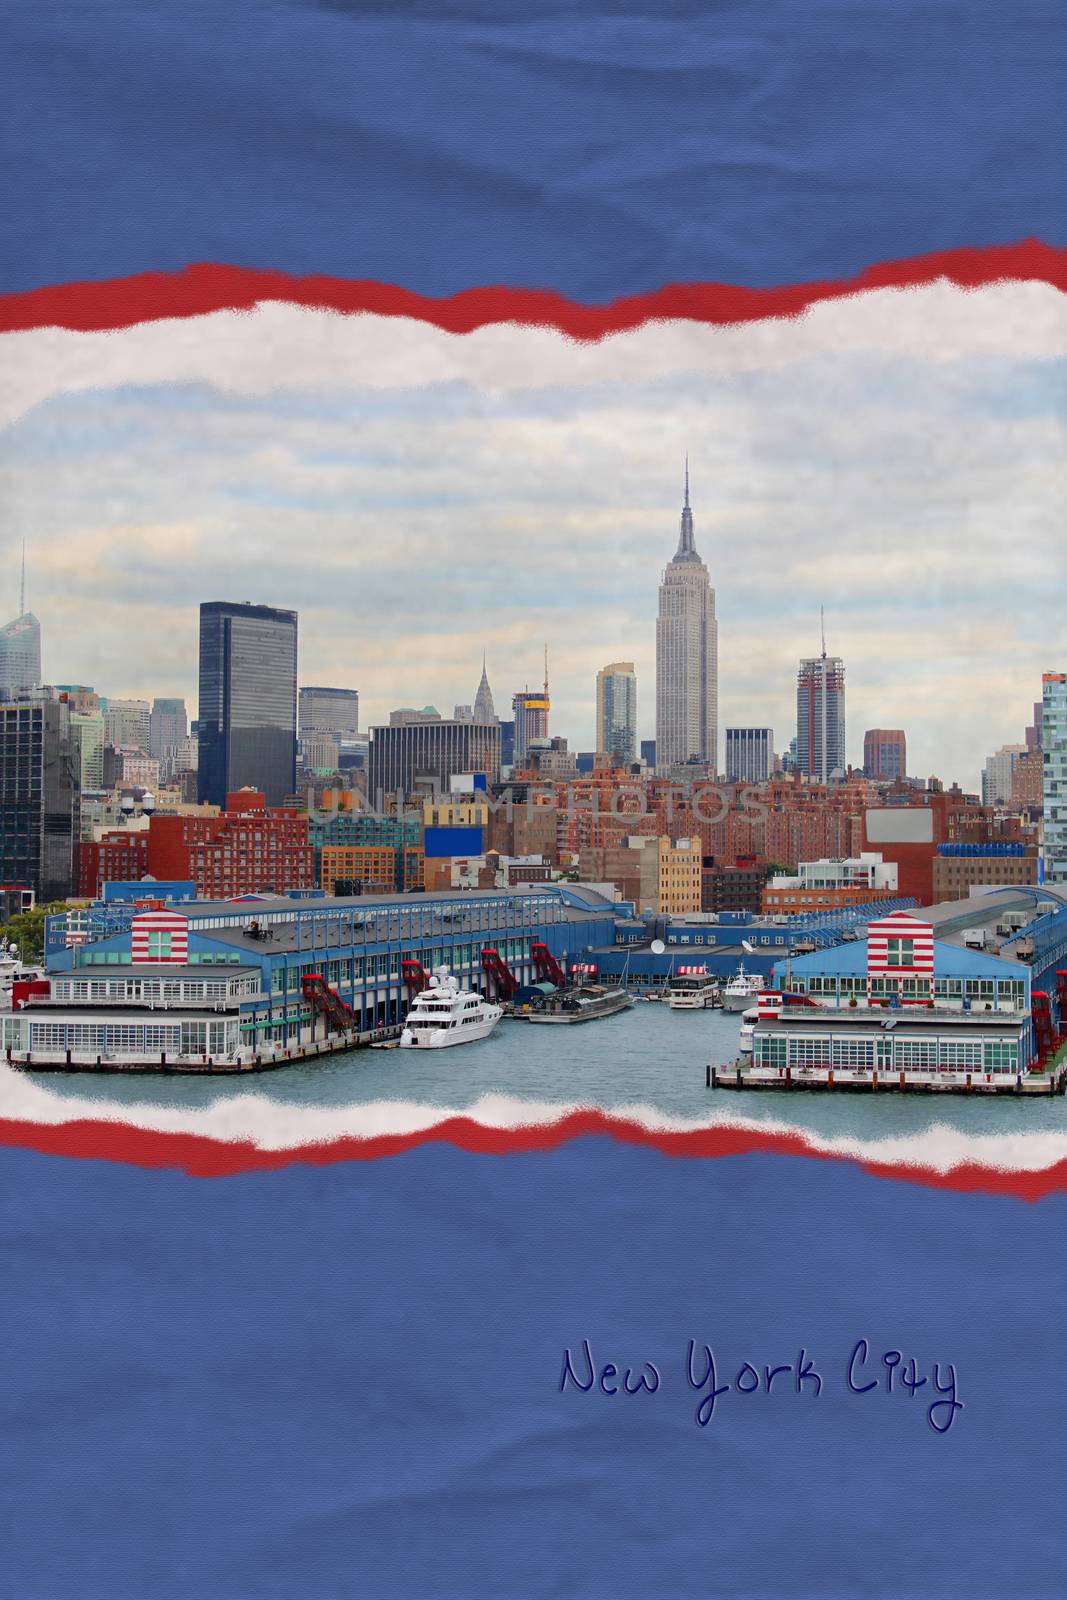 Ripped textured paper in red, white and blue, an illustration postcard of New York City, New York, USA, 